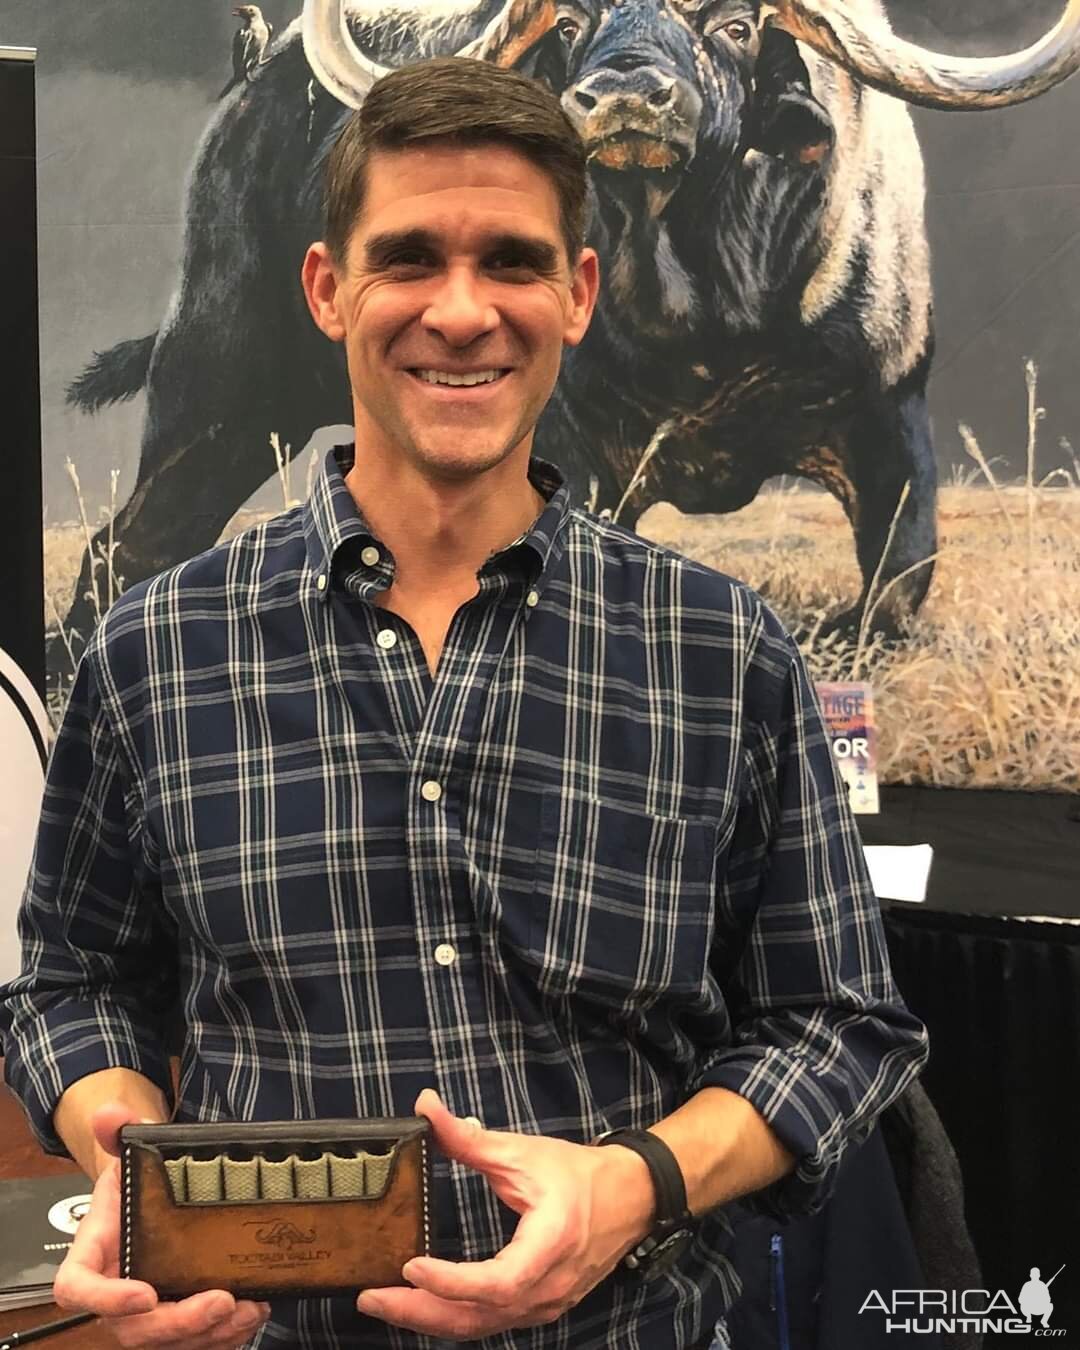 Lucky winner of his FB giveaway for a very nice leather ammo carrier at Dallas Safari Club (DSC) Convention 2020